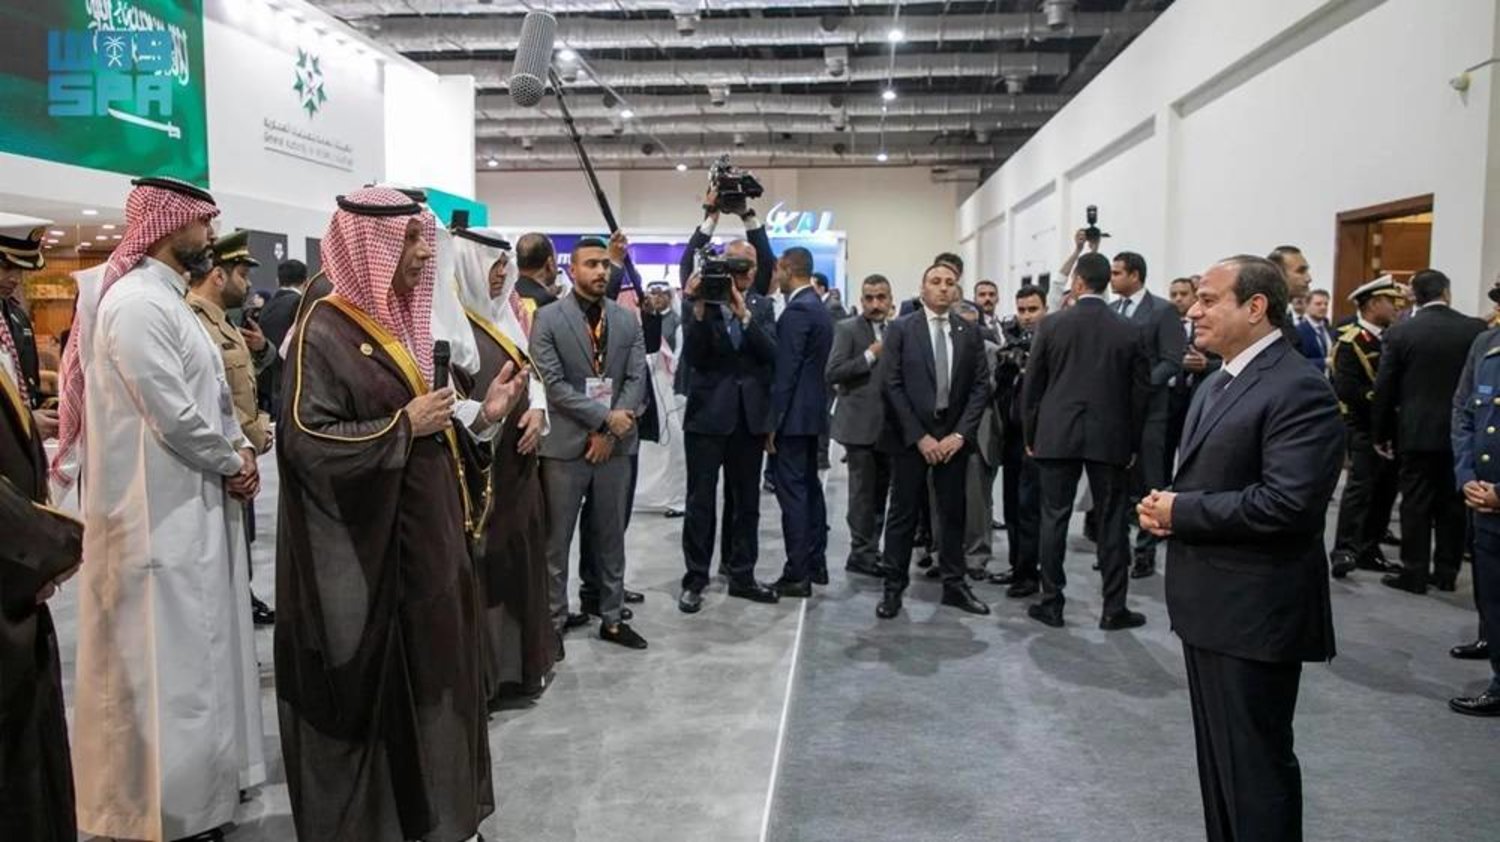 President SIsi is briefed on the products and offerings of national companies participating under the Saudi pavilion. (SPA)